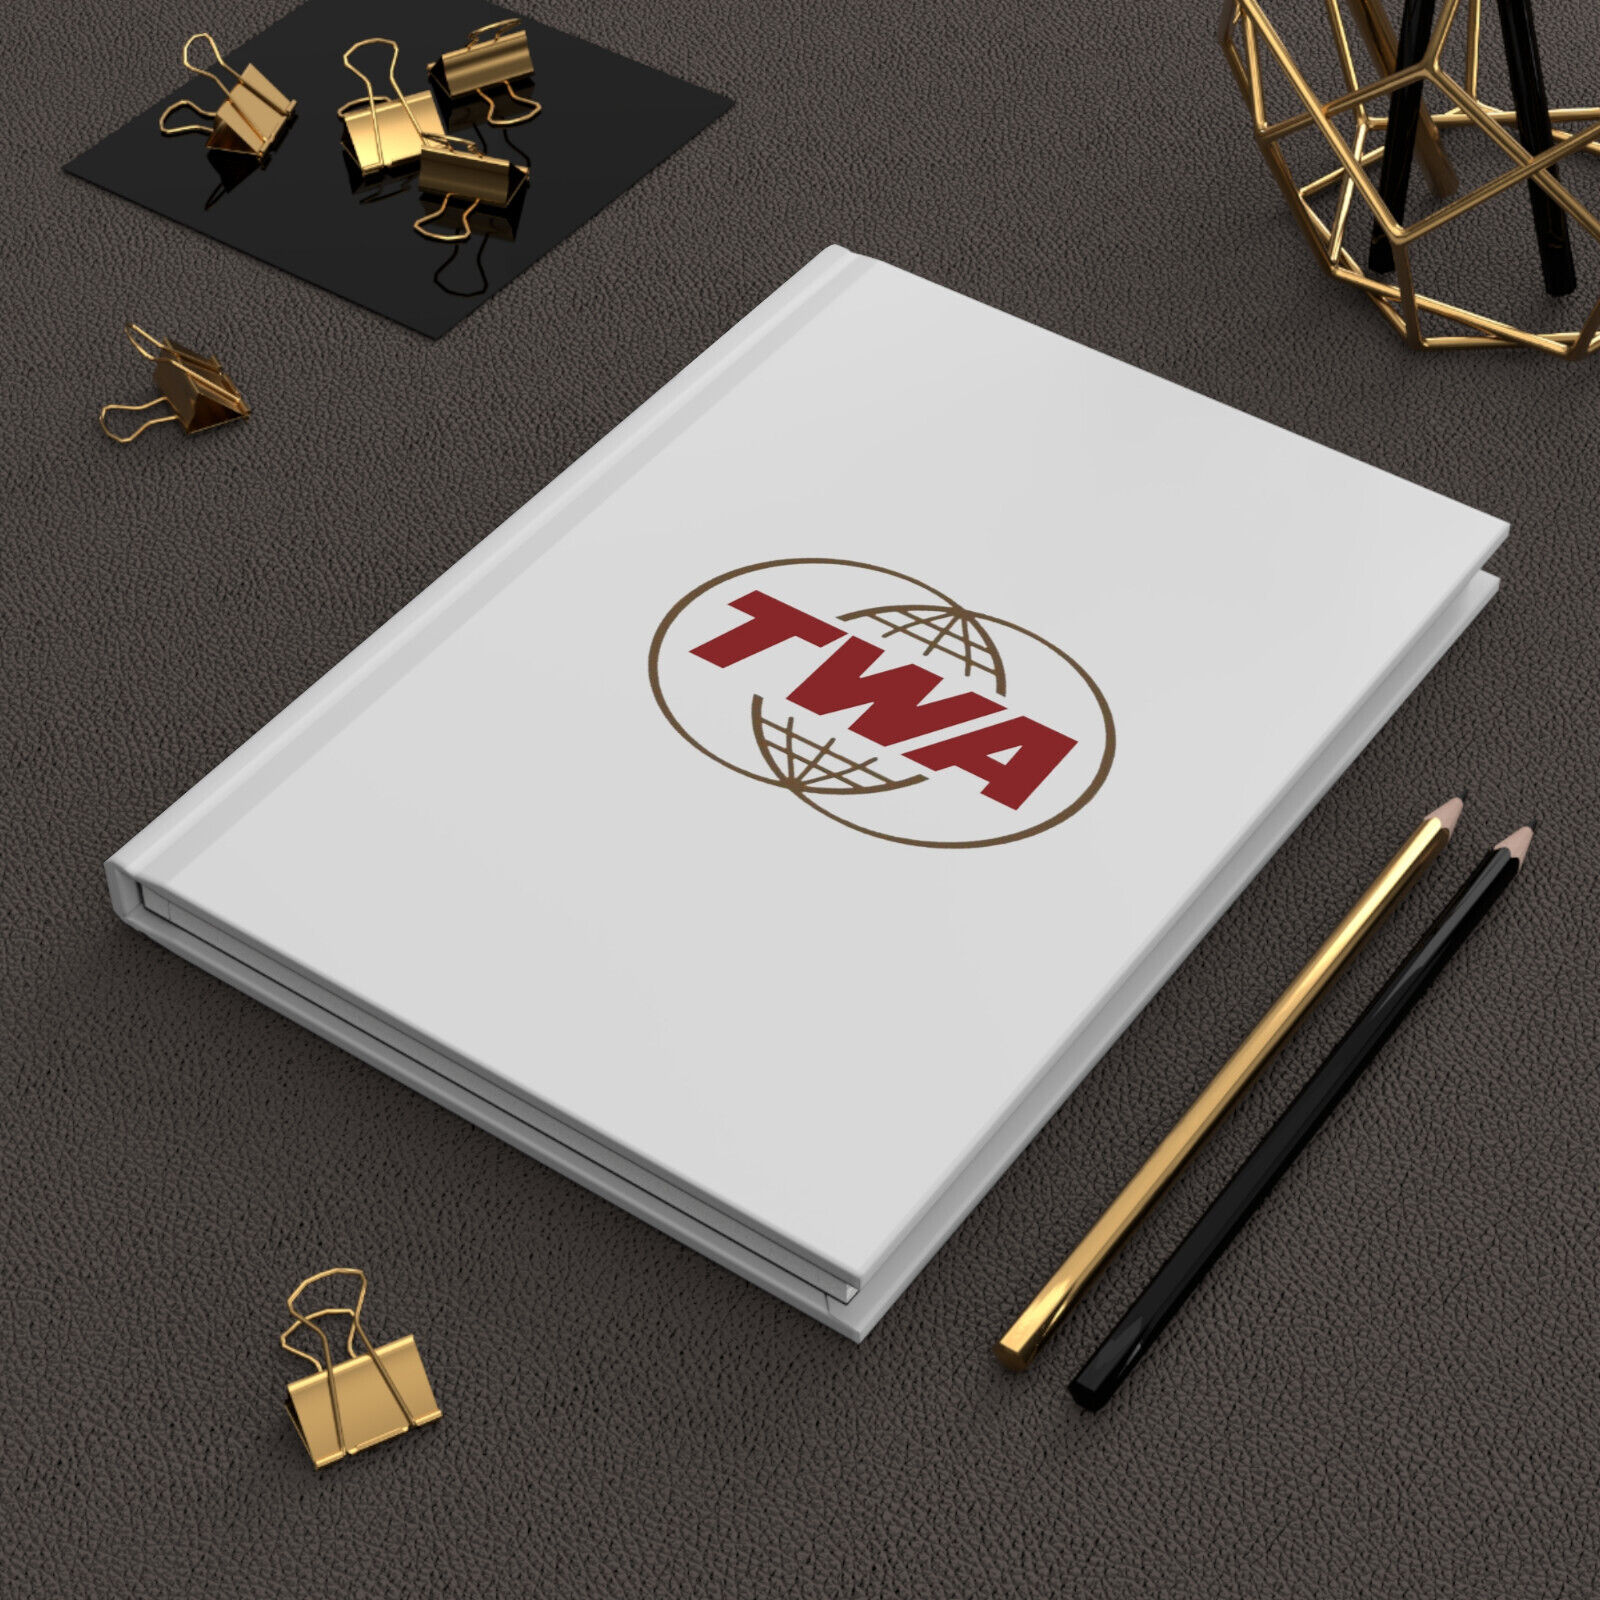 TWA - Trans World Airlines Hardcover Journal